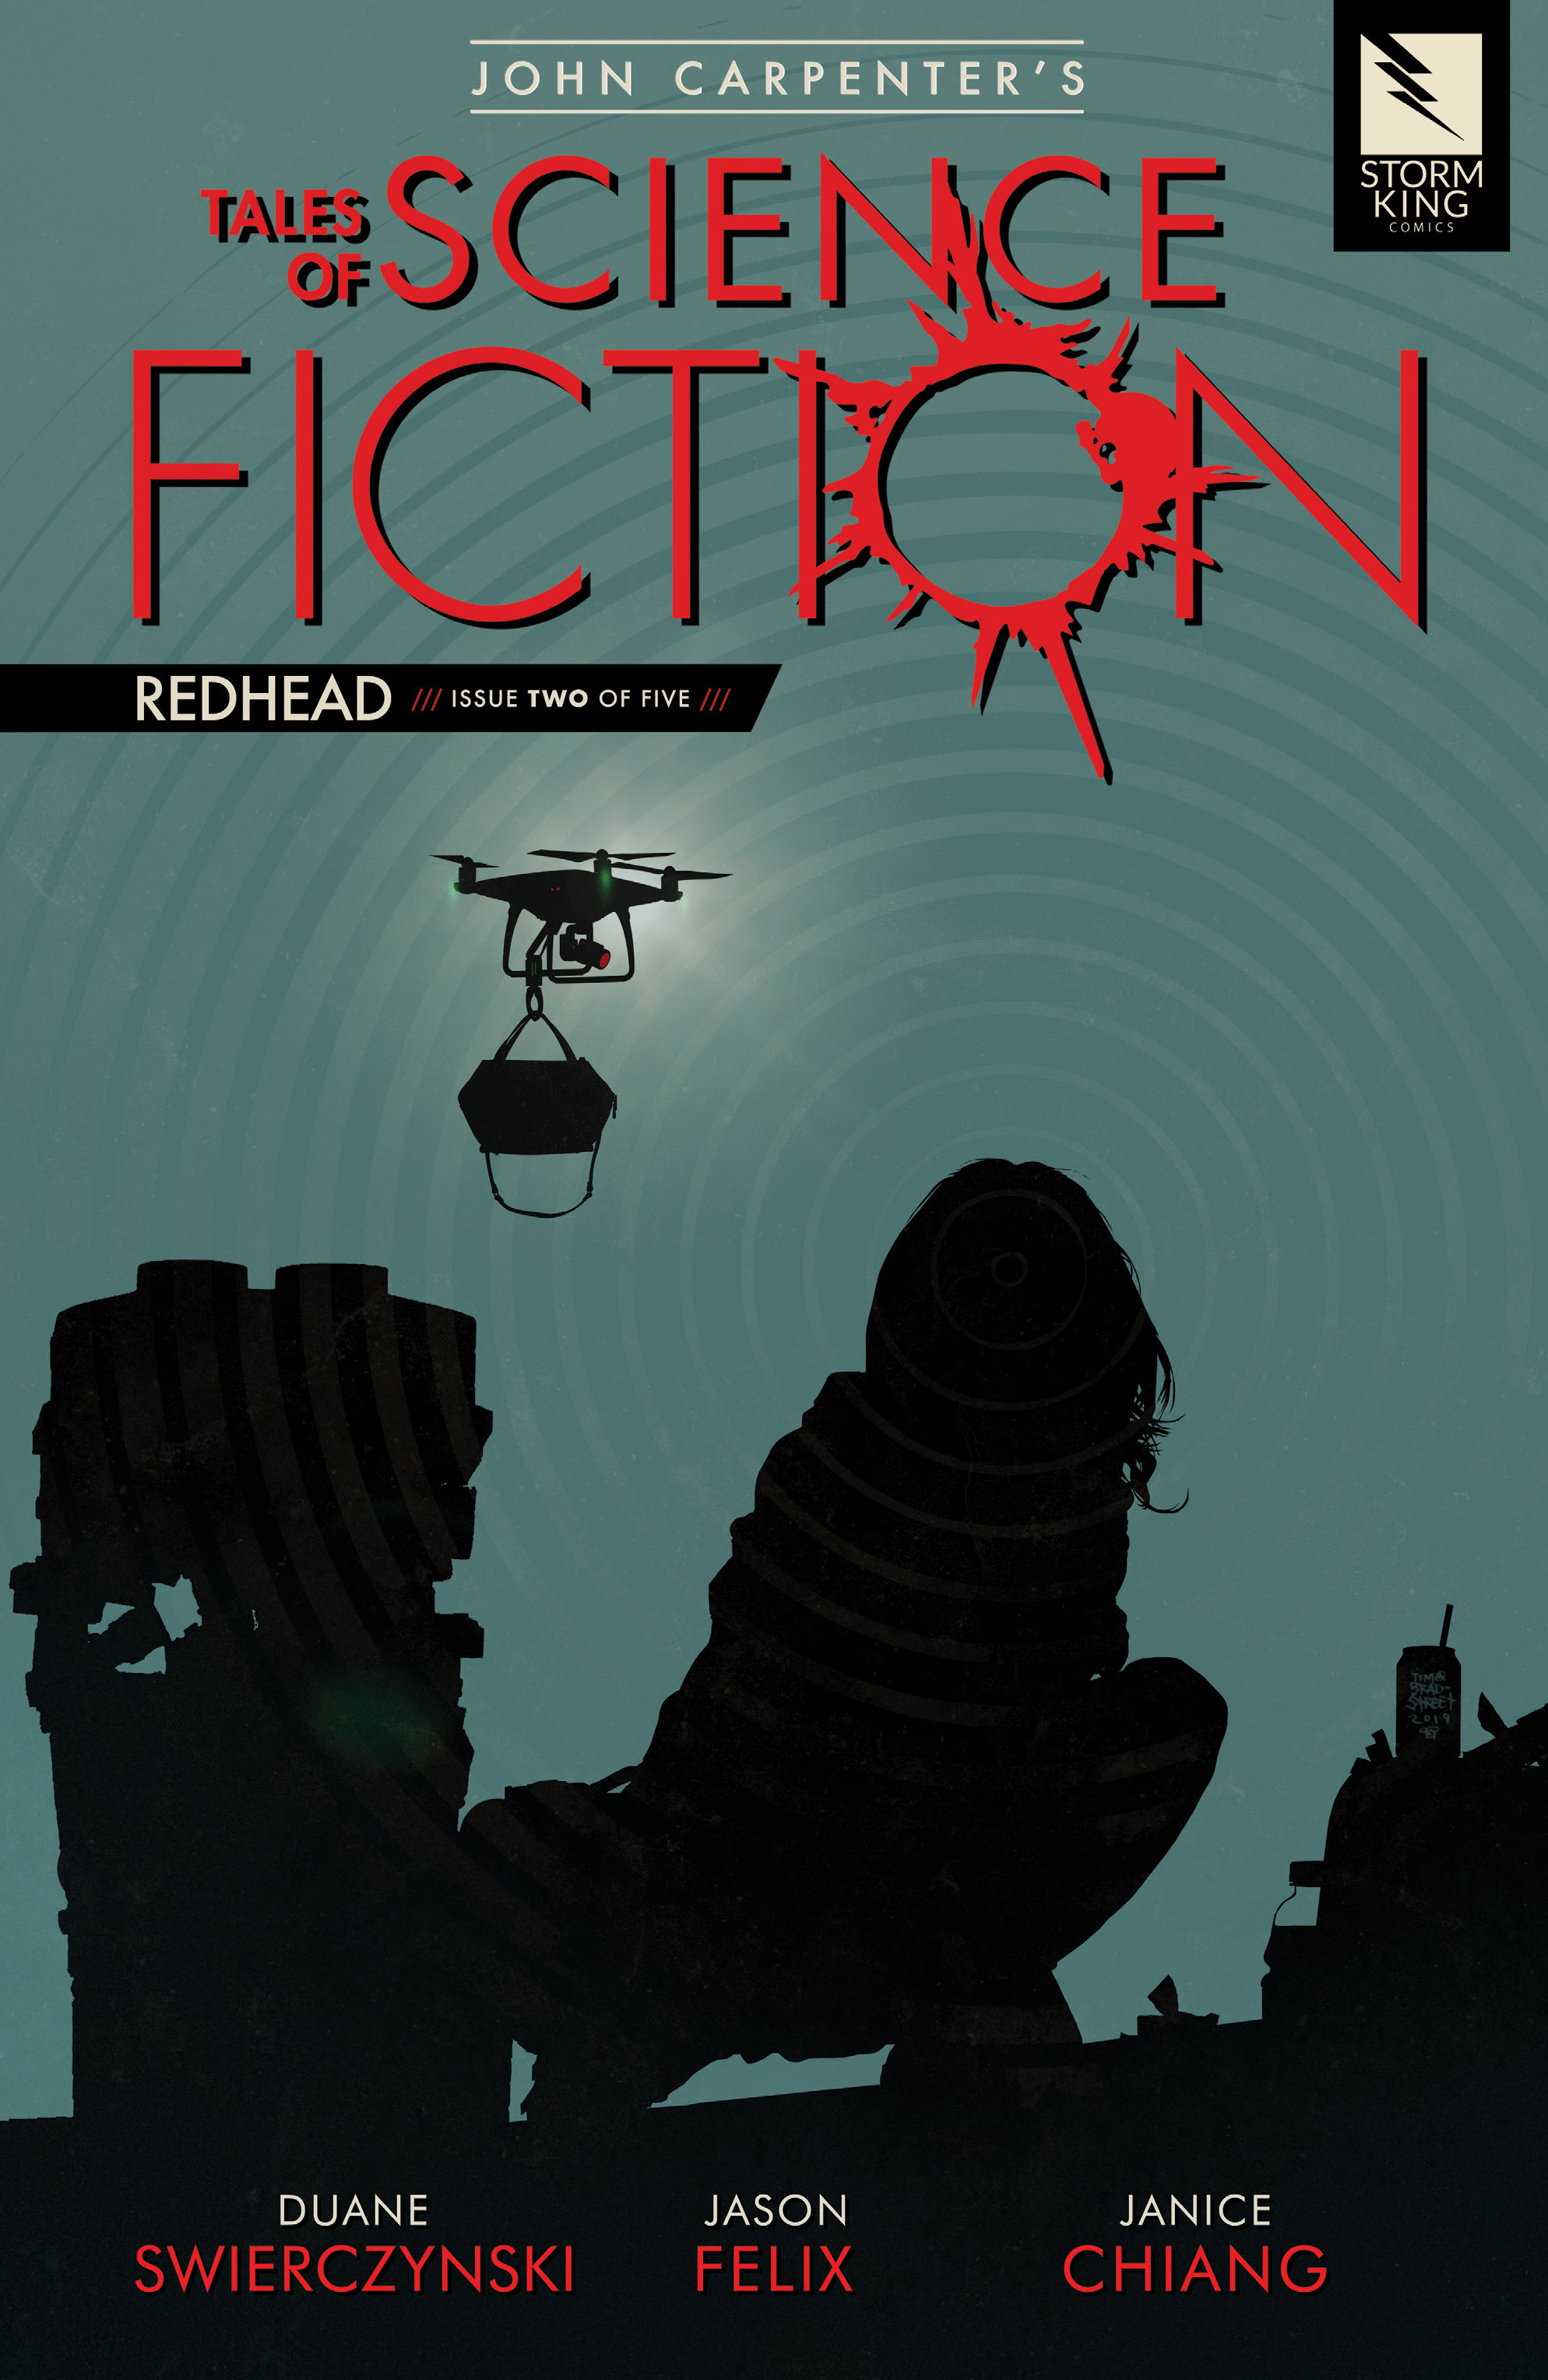 Read online John Carpenter's Tales of Science Fiction: Redhead comic -  Issue #2 - 1